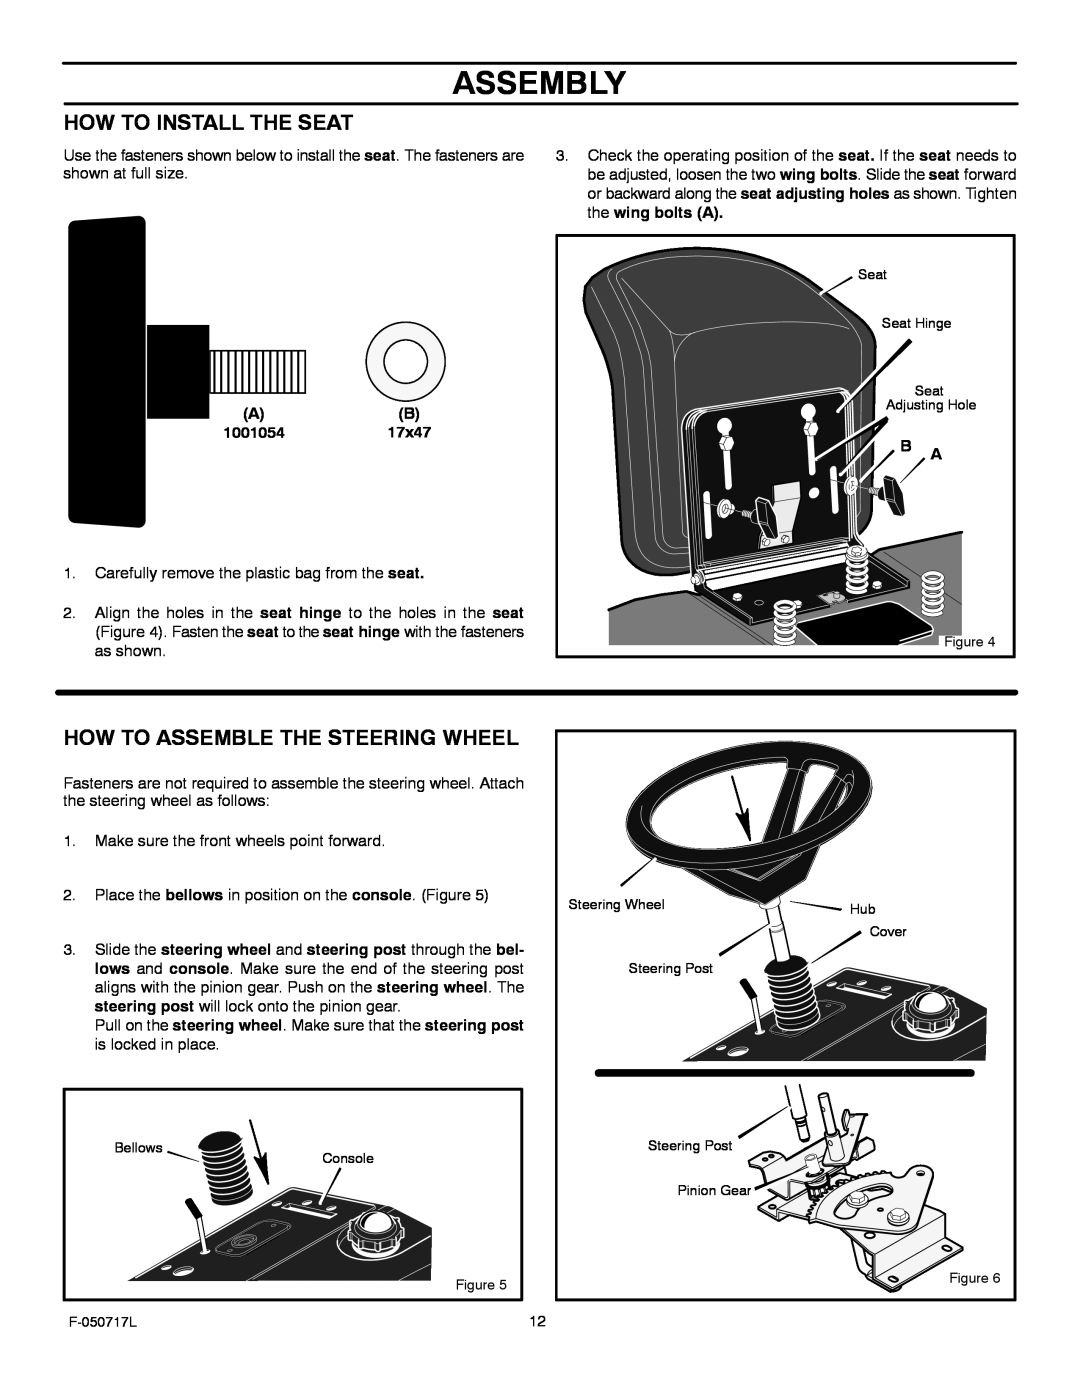 Murray 387002x92D manual Assembly, How To Install The Seat, How To Assemble The Steering Wheel 